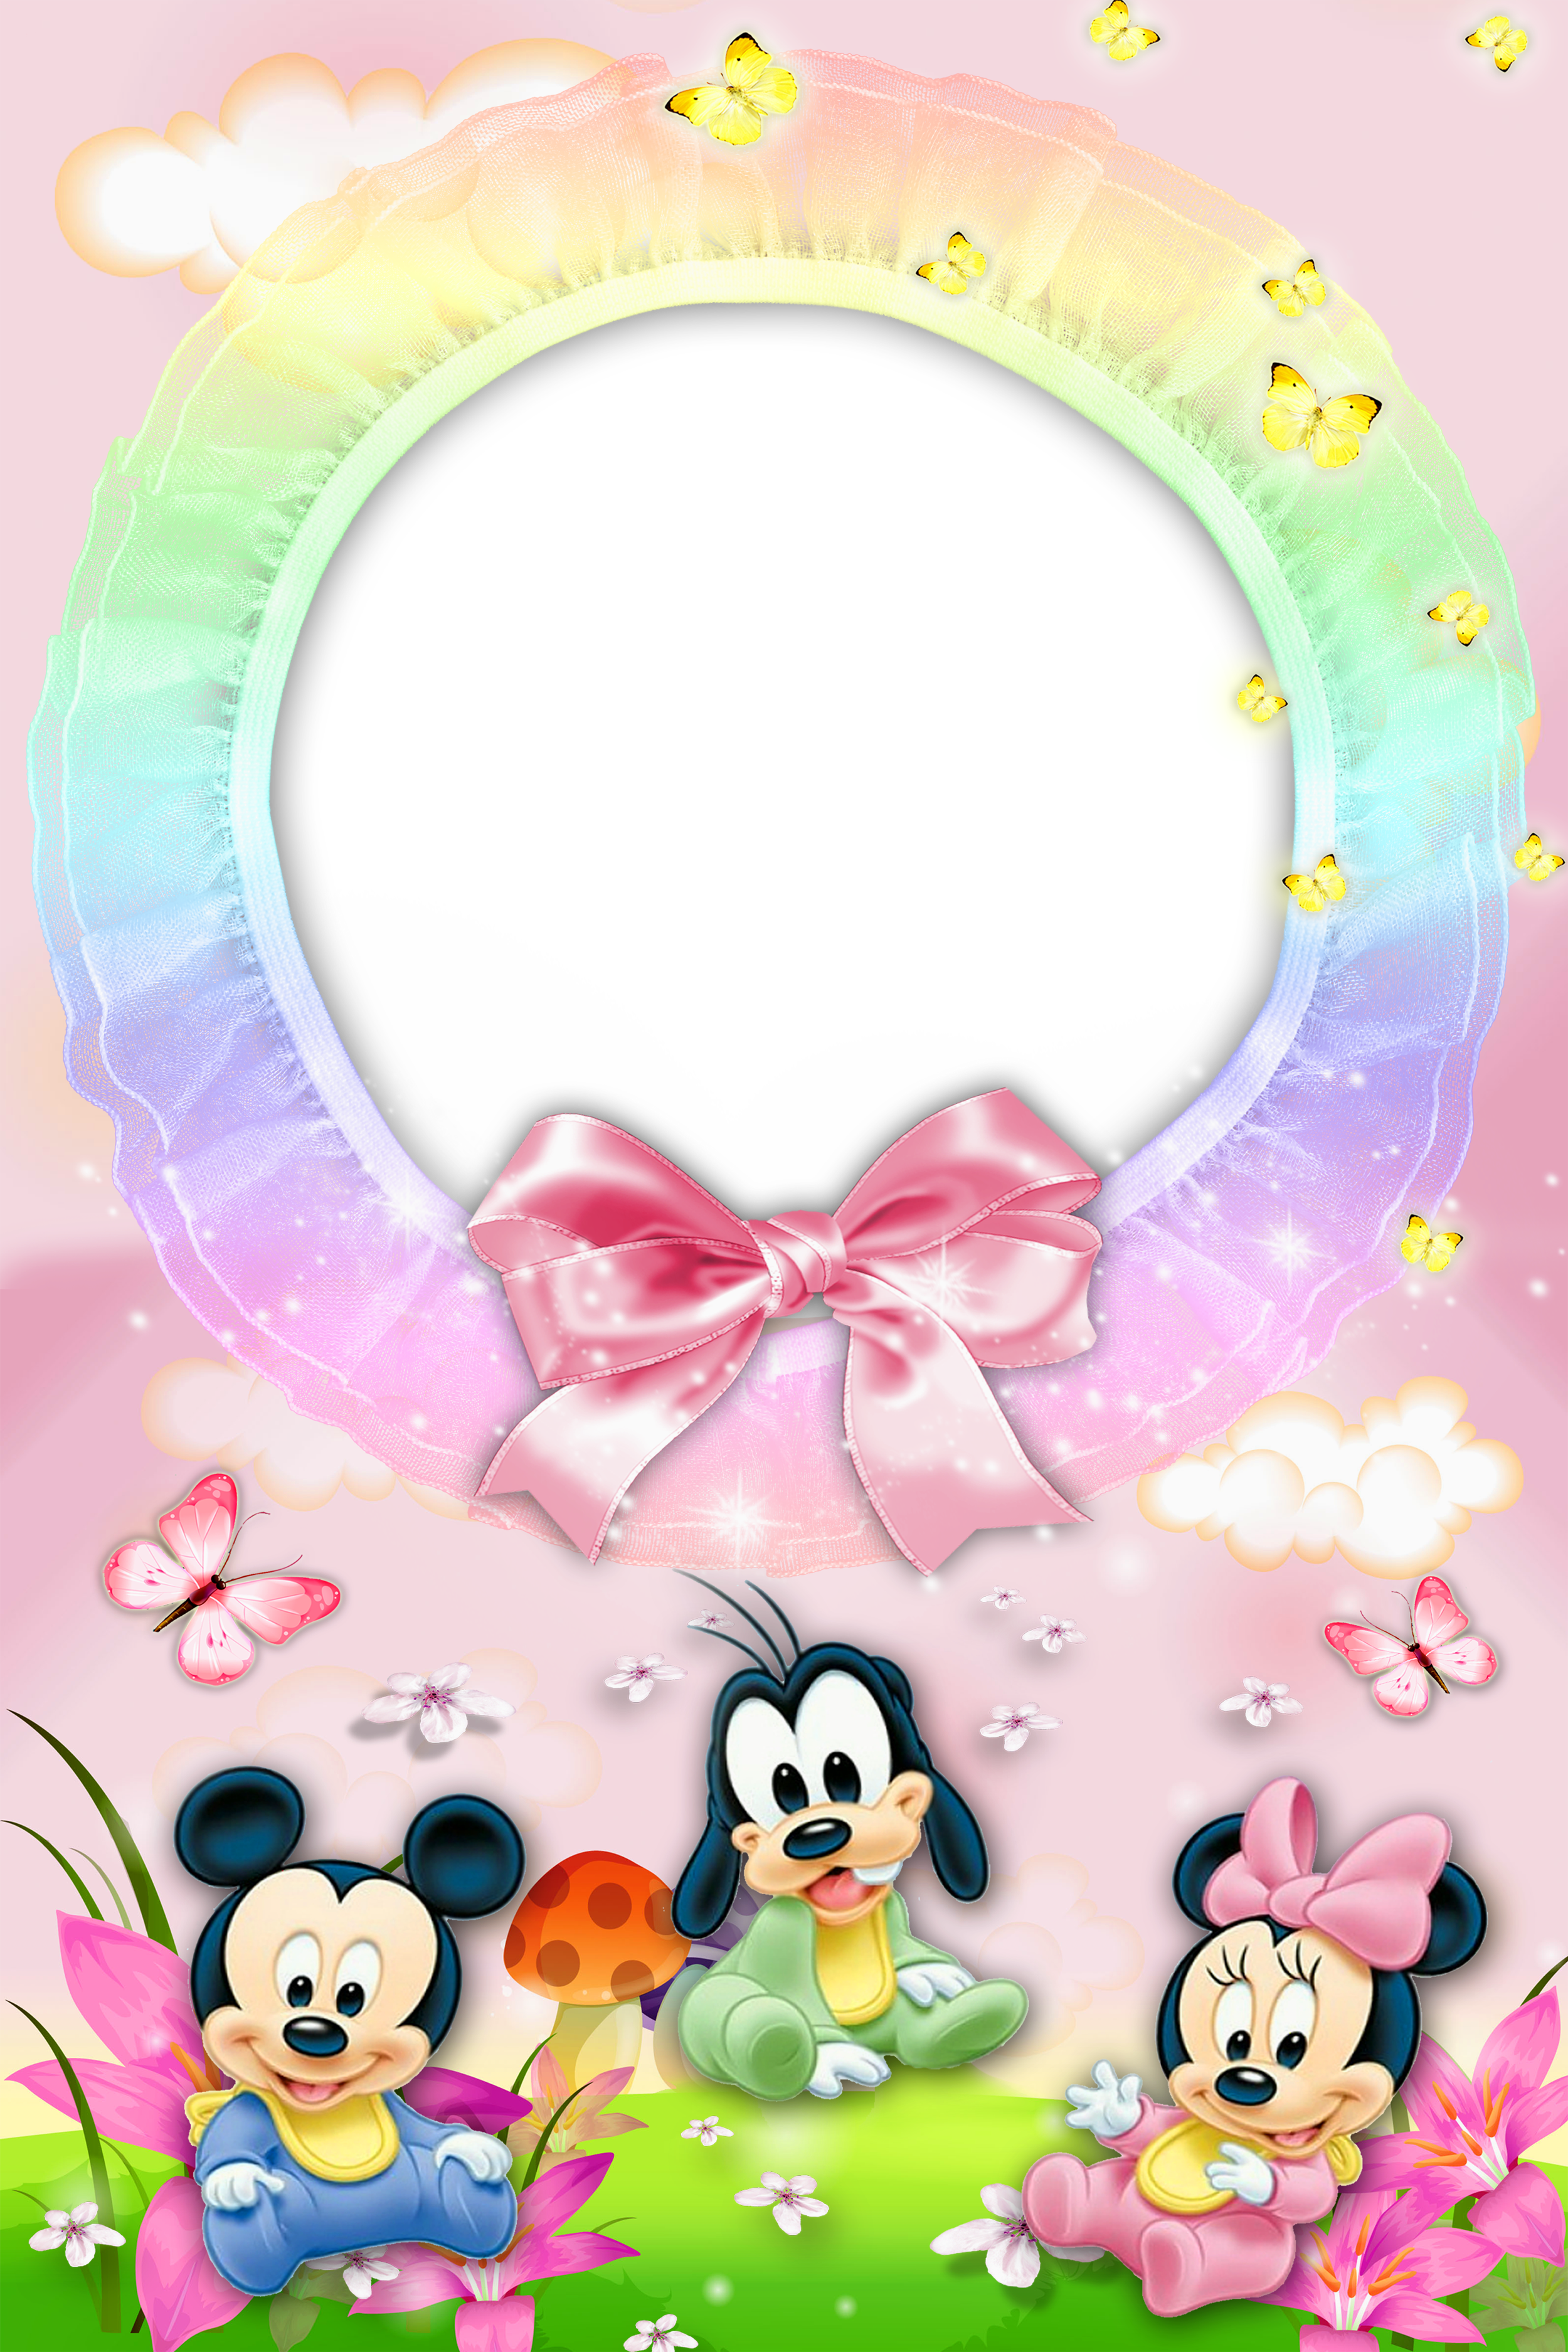 Baby with gallery yopriceville. Mickey mouse frame png